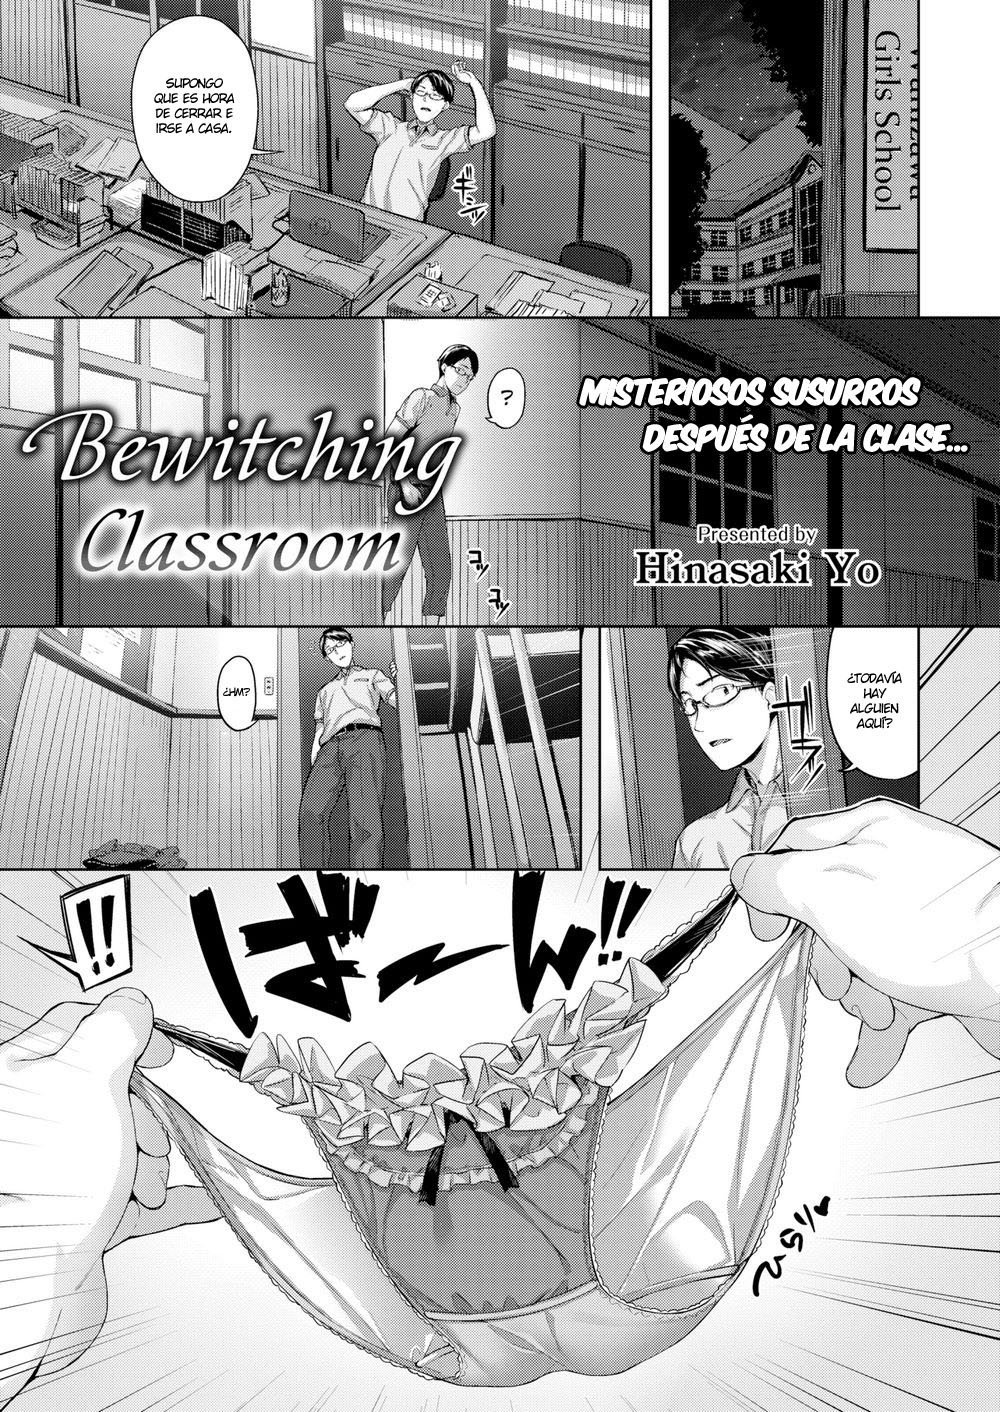 Bewitching Classroom - 1